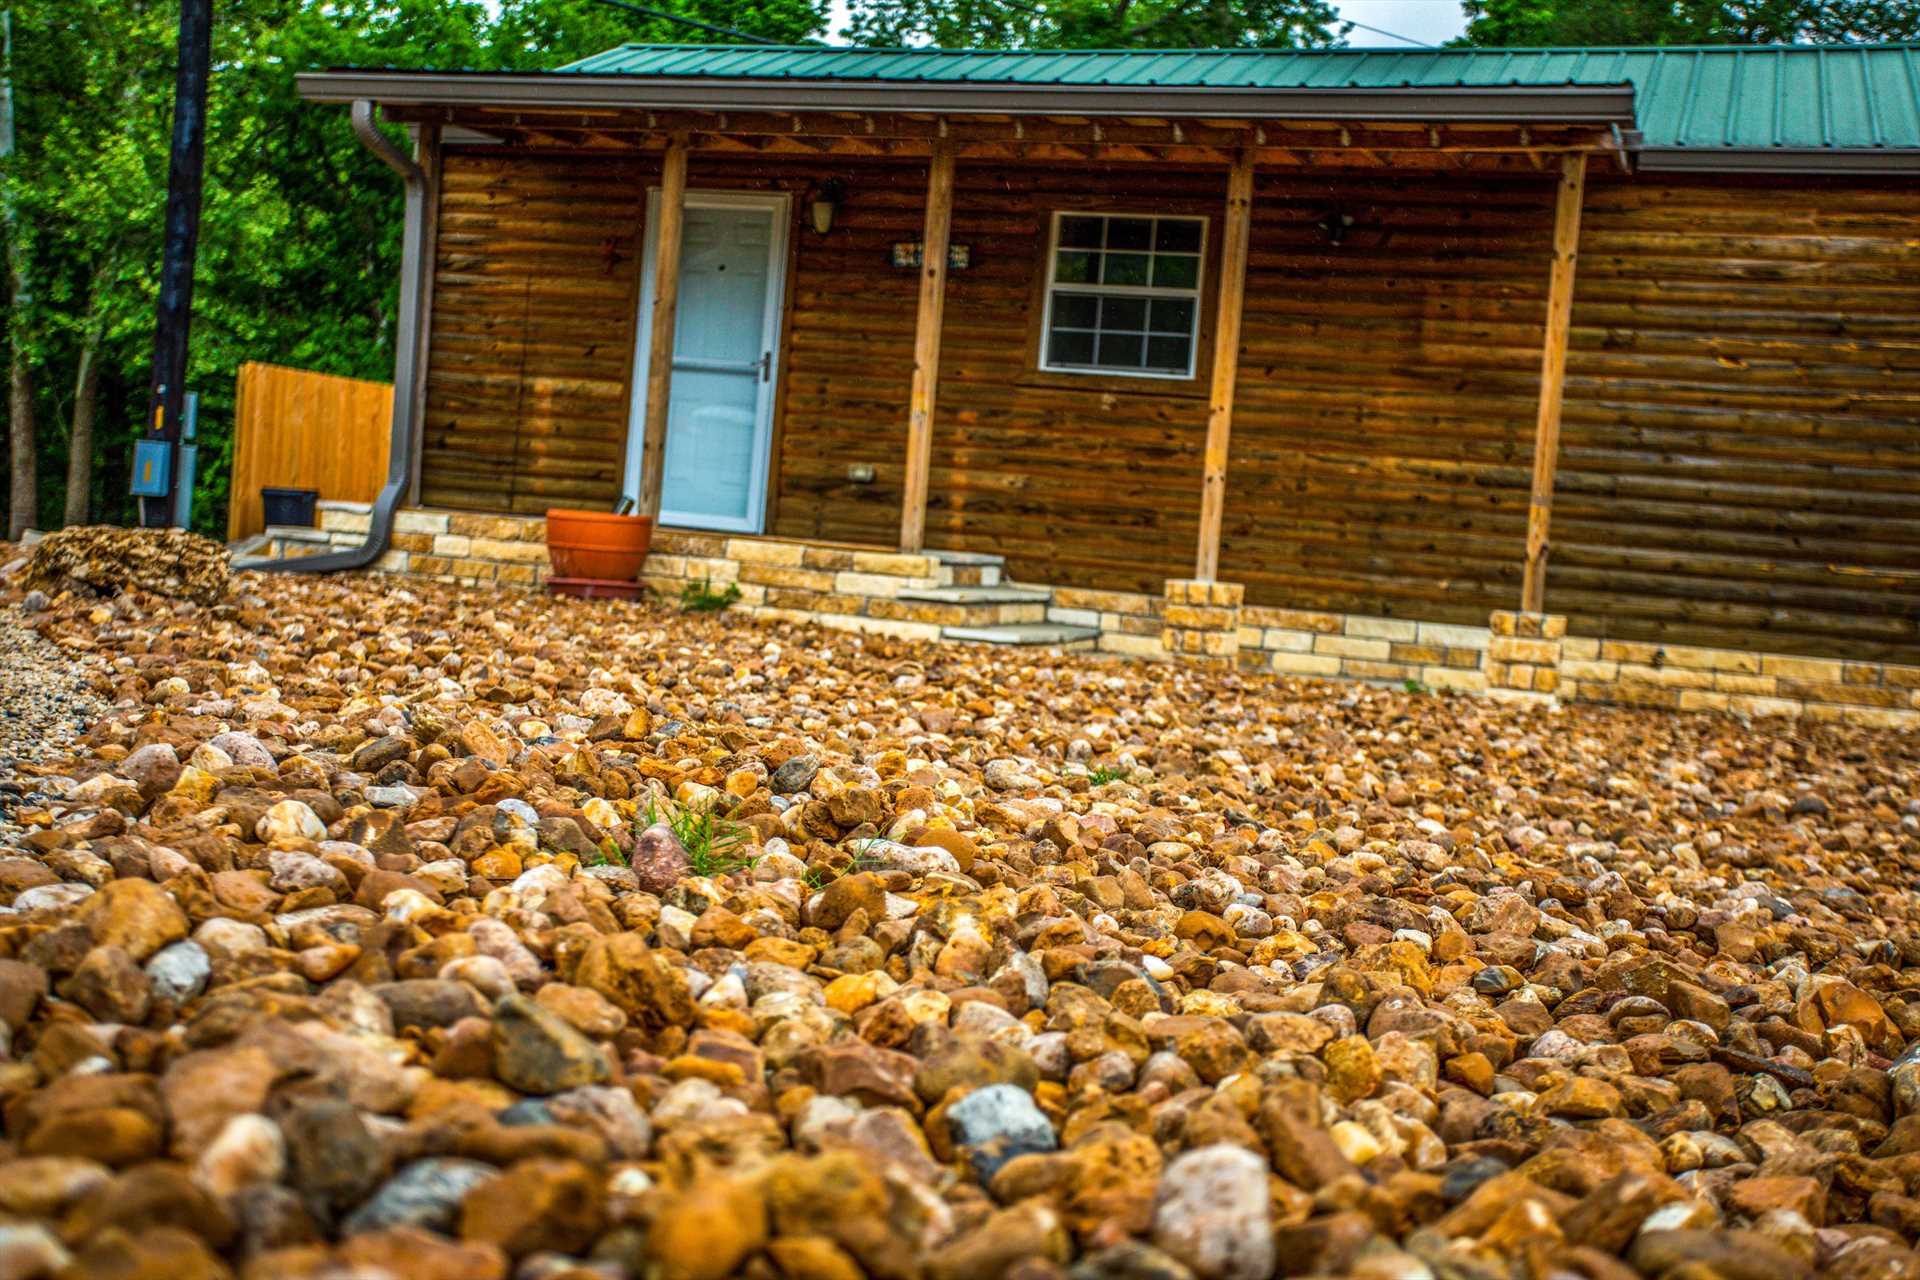                                                 Colored stones add a whimsical and elegant touch to the landscaping in front of the cabin.